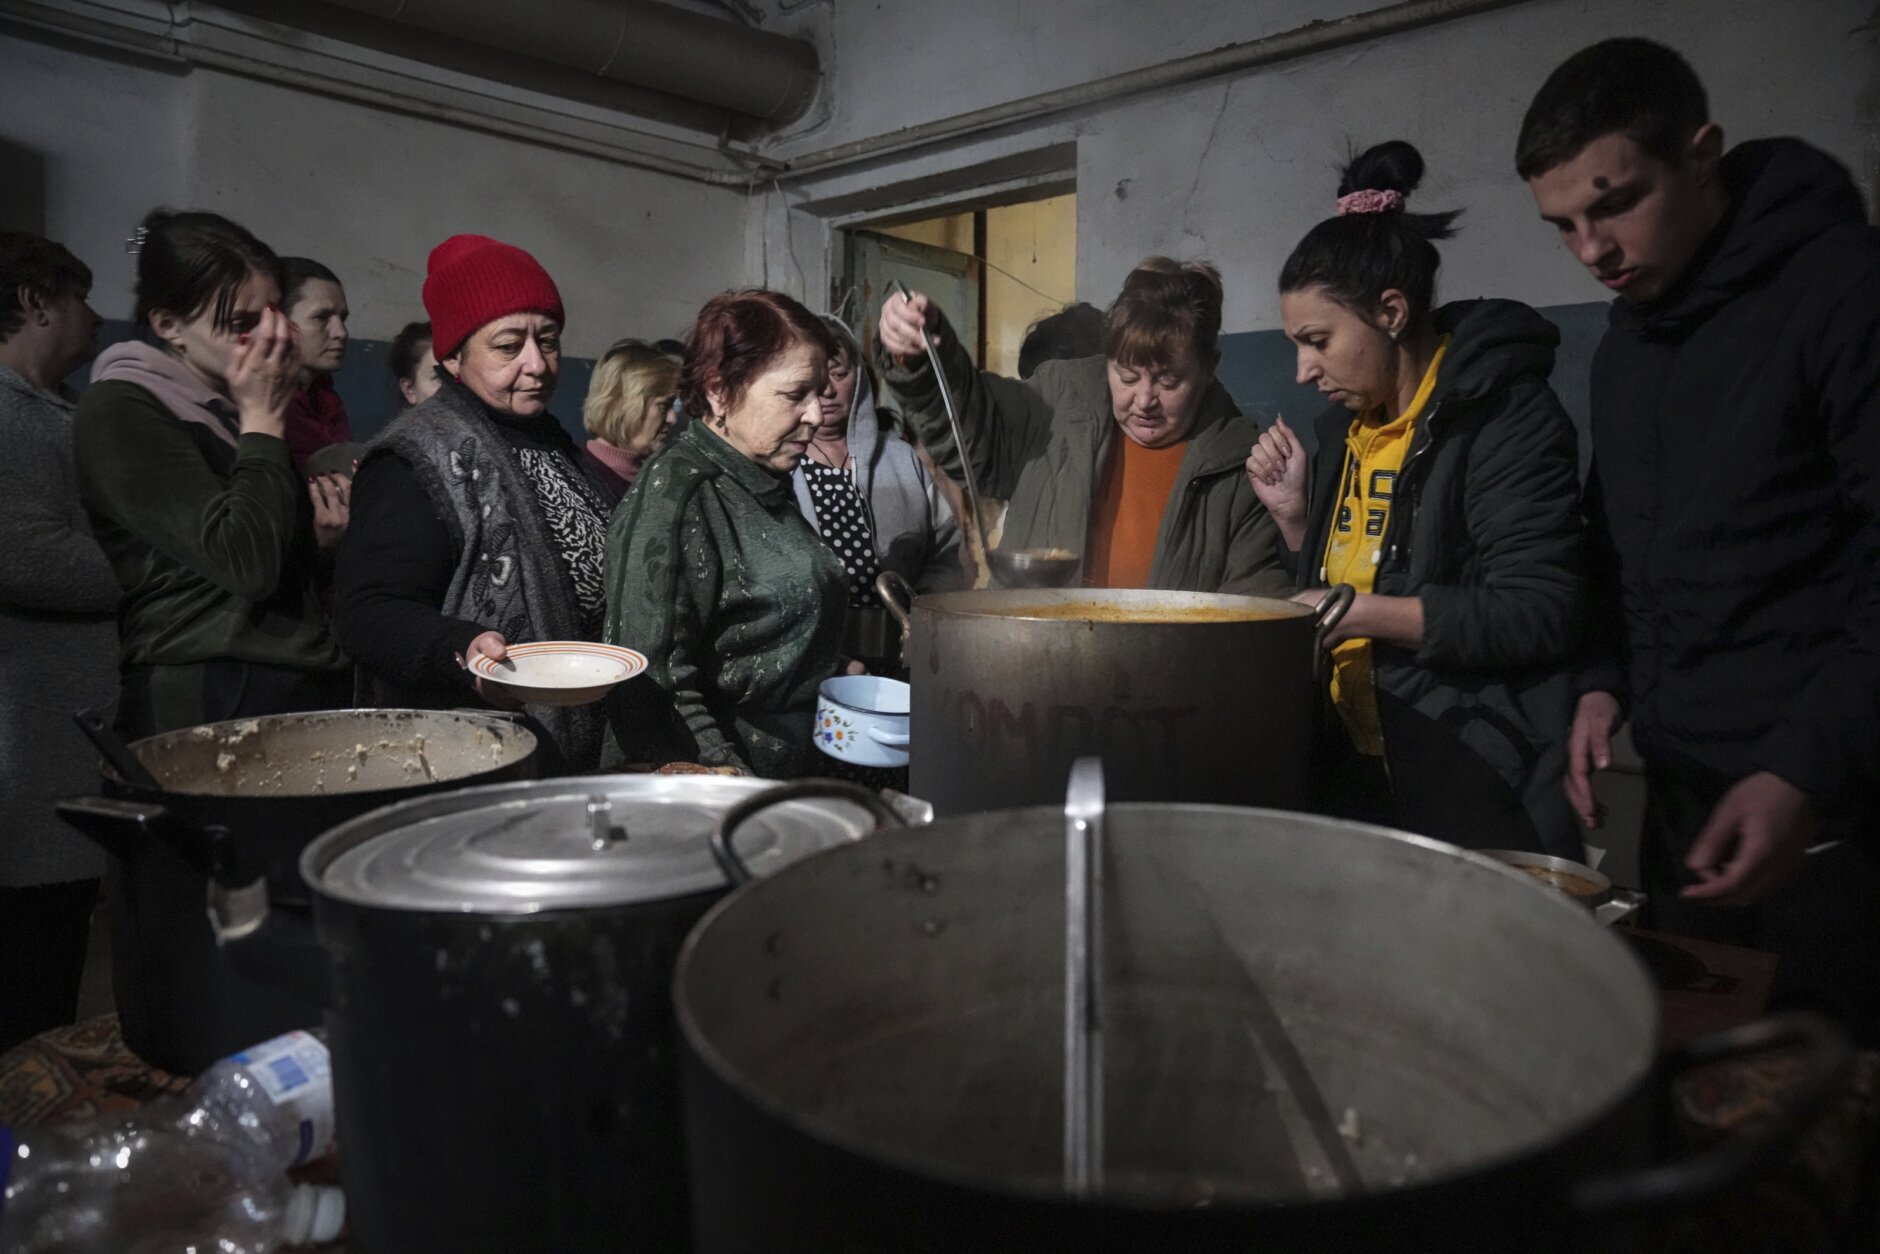 <p>People queue to receive hot food in a improvised bomb shelter in Mariupol, Ukraine, Monday, March 7, 2022. (AP Photo/Evgeniy Maloletka)</p>
